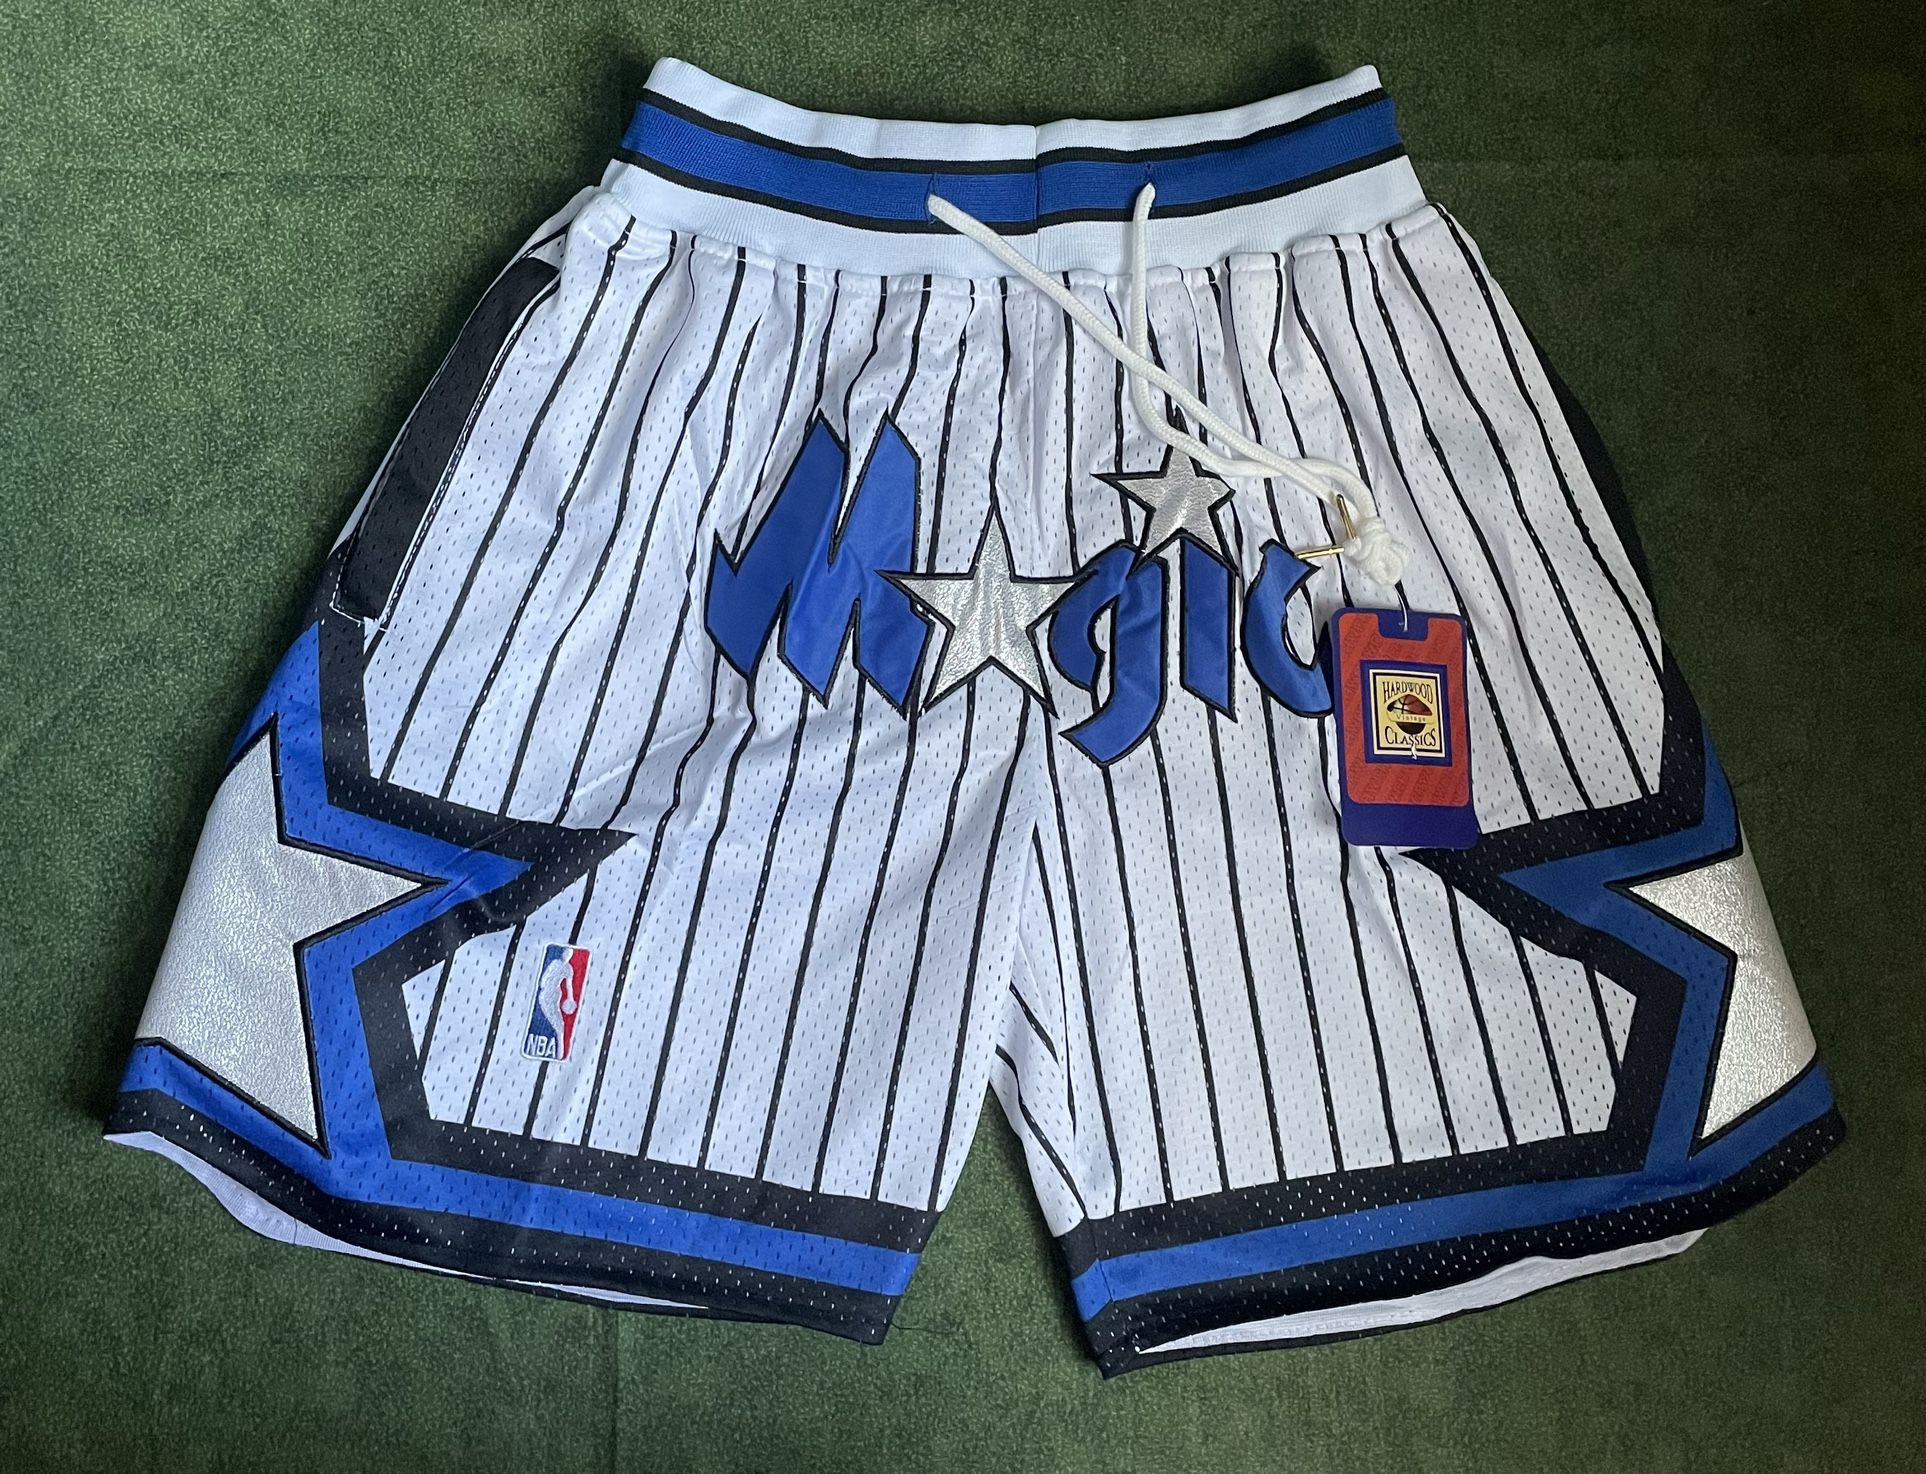 ORLANDO MAGIC JUST DON NBA BASKETBALL SHORTS BRAND NEW WITH TAGS SIZES SMALL, MEDIUM AND LARGE AVAILABLE